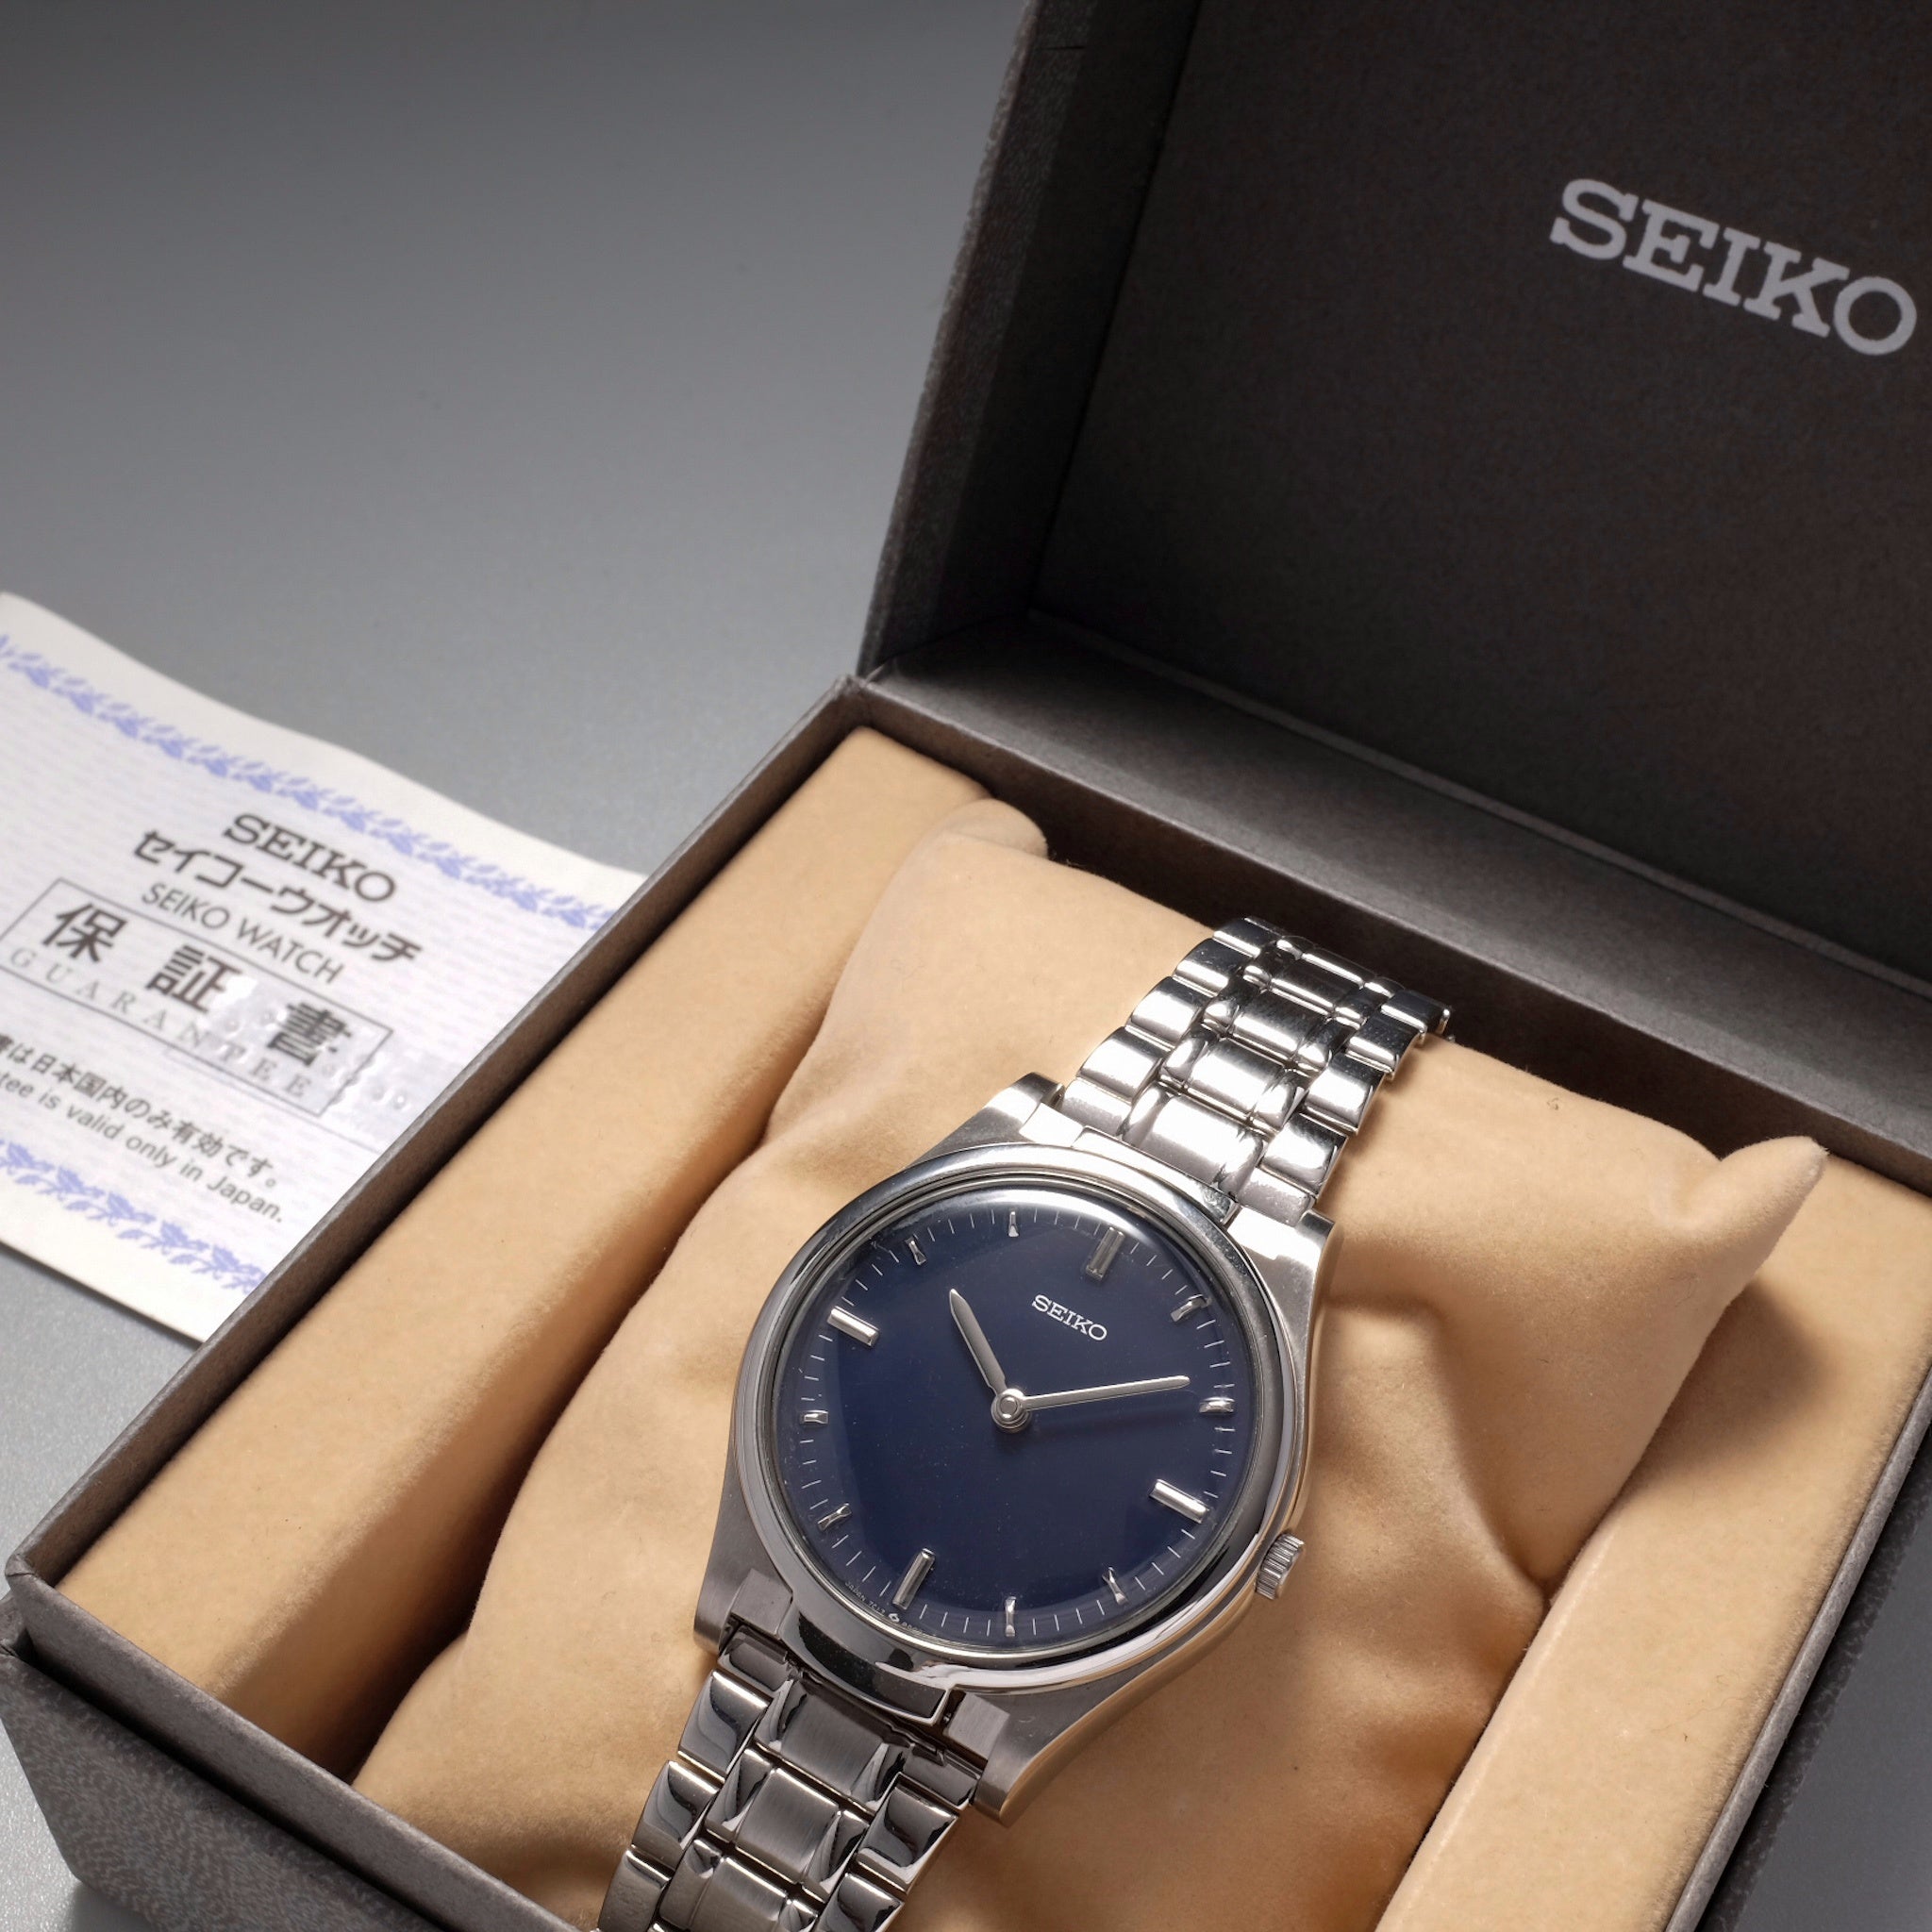 Seiko Braille 7C17-8000 from 2003 (Box and Warranty) – Paleh